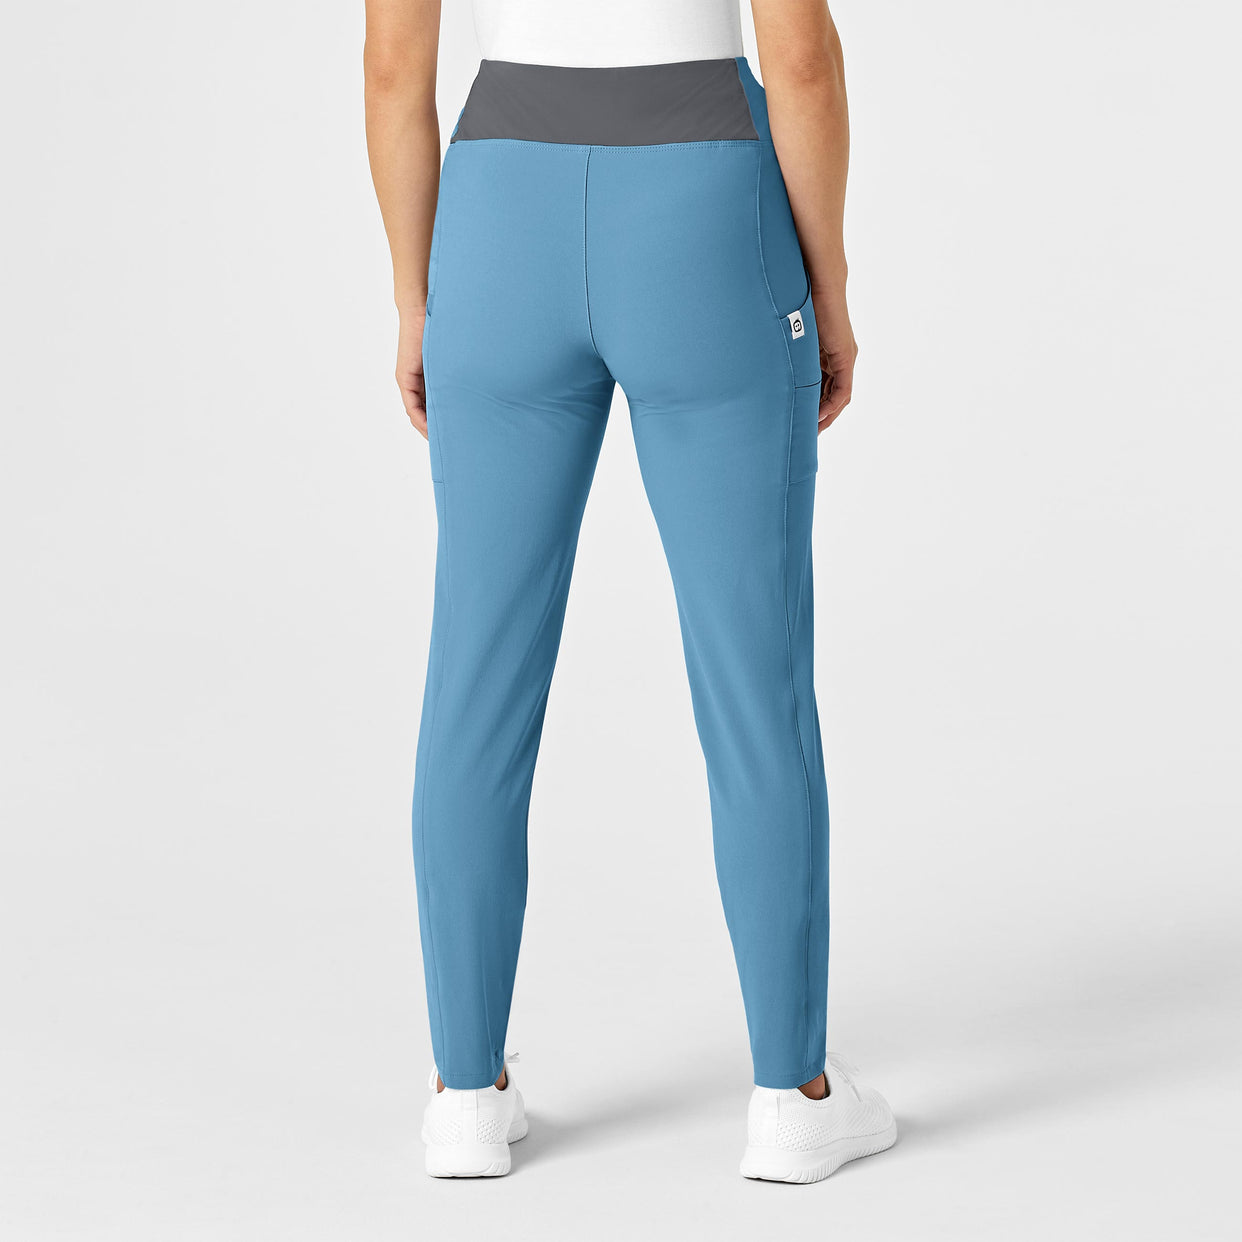 Women Winter Graphene Pants, High Waisted Tummy Control Plus Thick